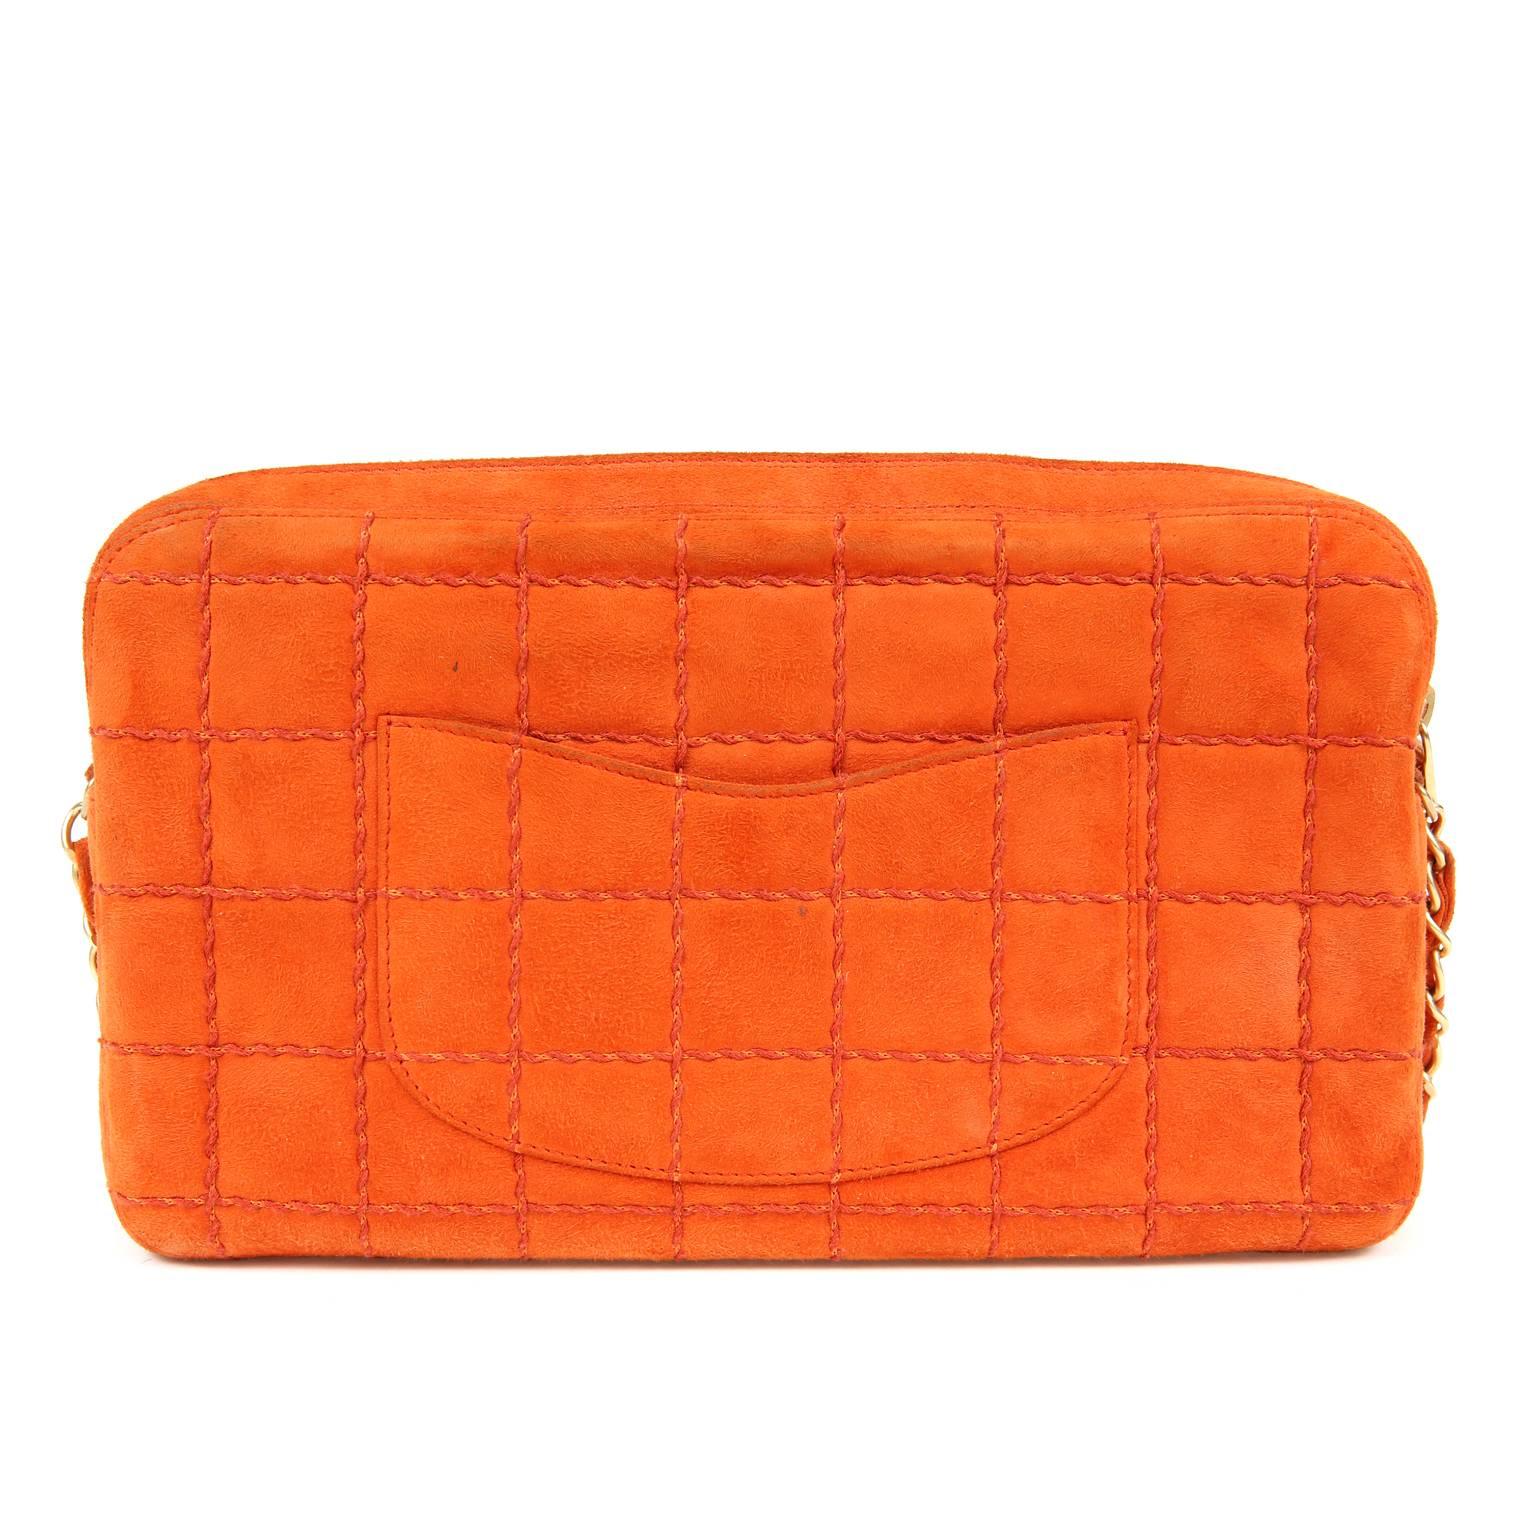 Chanel Orange Suede Medium Camera Bag- EXCELLENT
Vibrant orange suede adds interest to any outfit and is complementary with all the neutrals.  Twisted thread overlay creates a square quilted pattern.  Matte gold hardware and zip top closure.  Orange